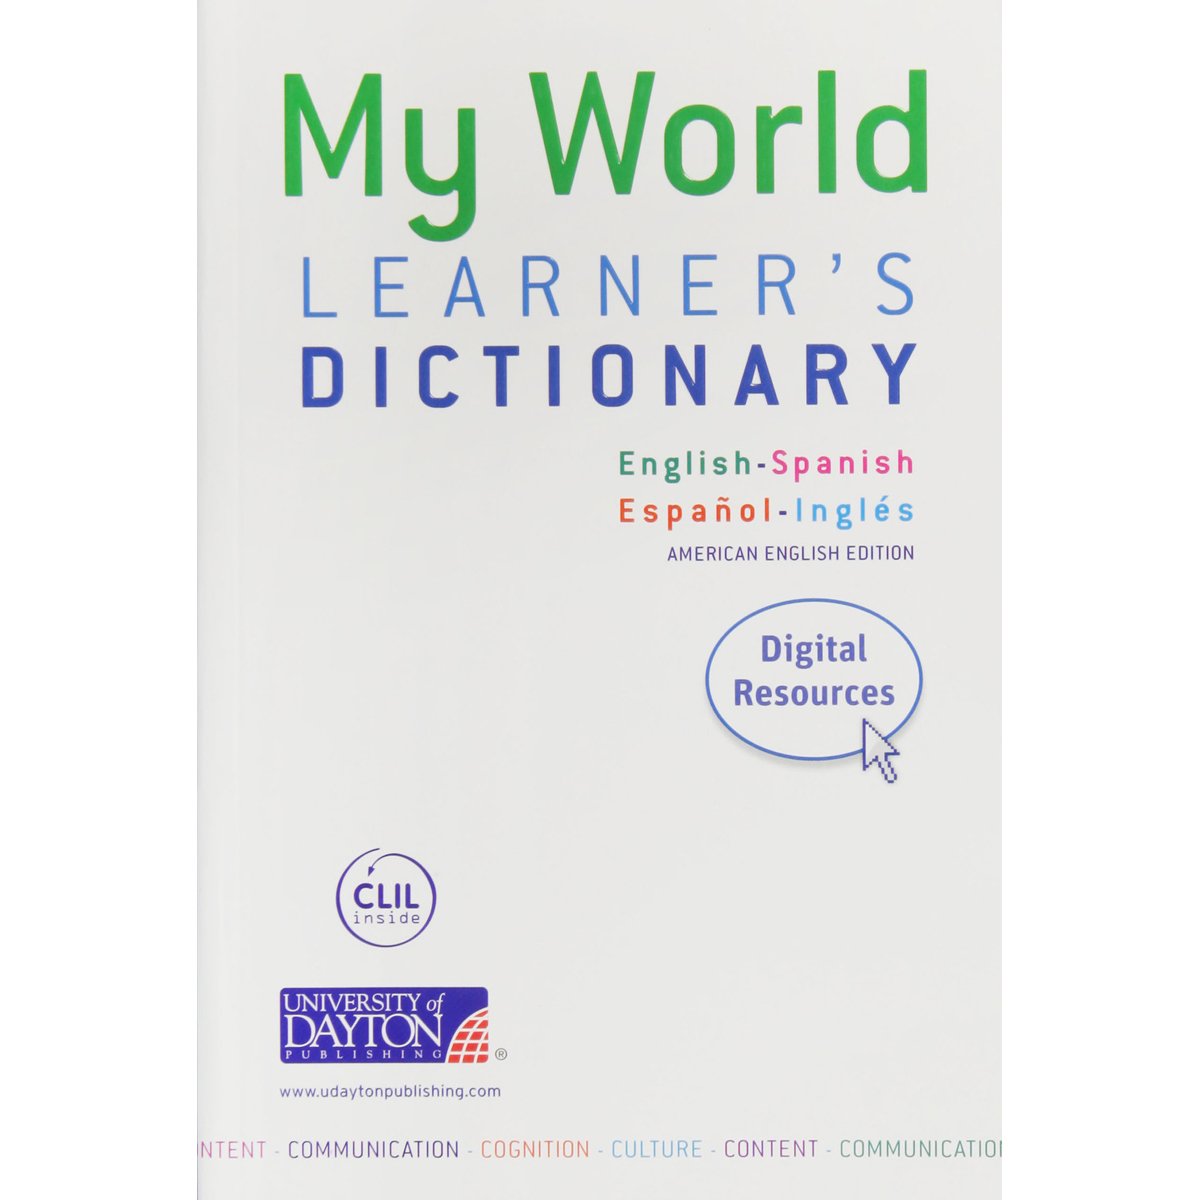 My World. Learners Dictionary05